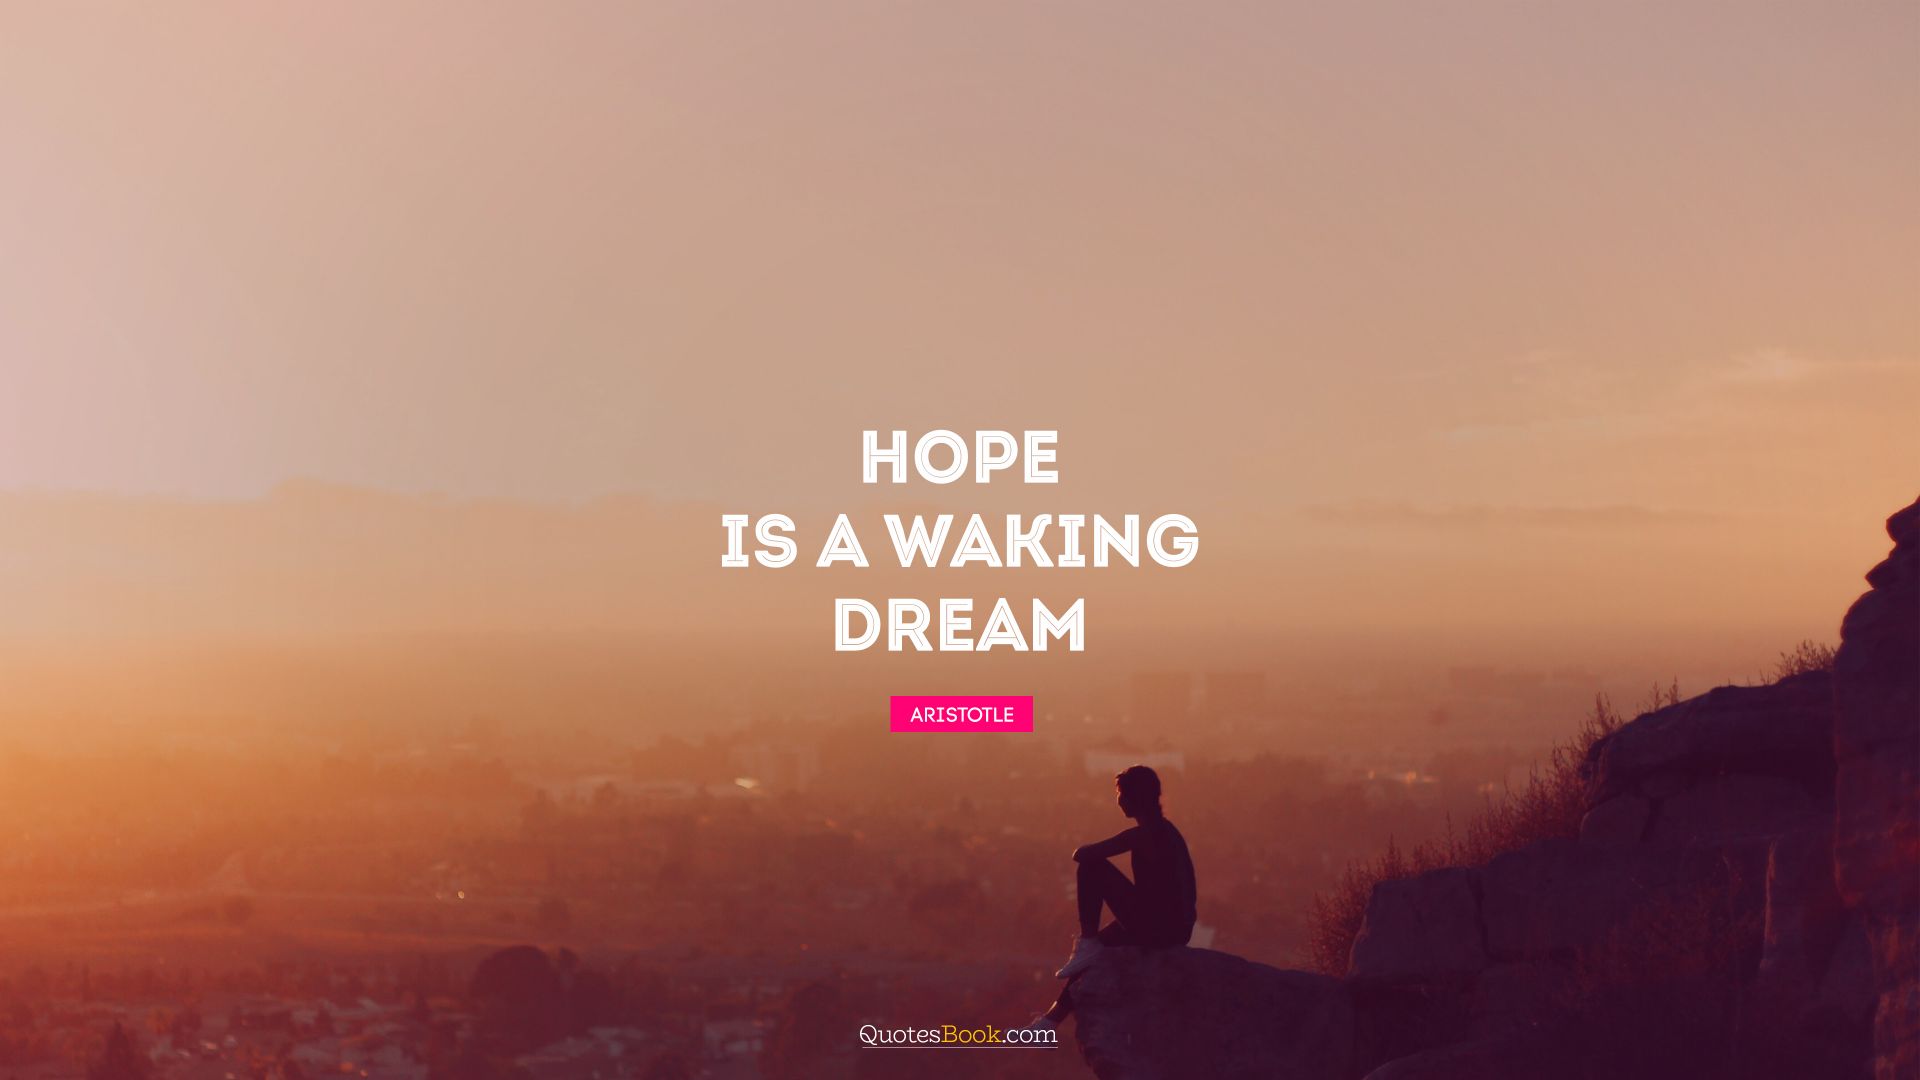 Hope is a waking dream. - Quote by Aristotle